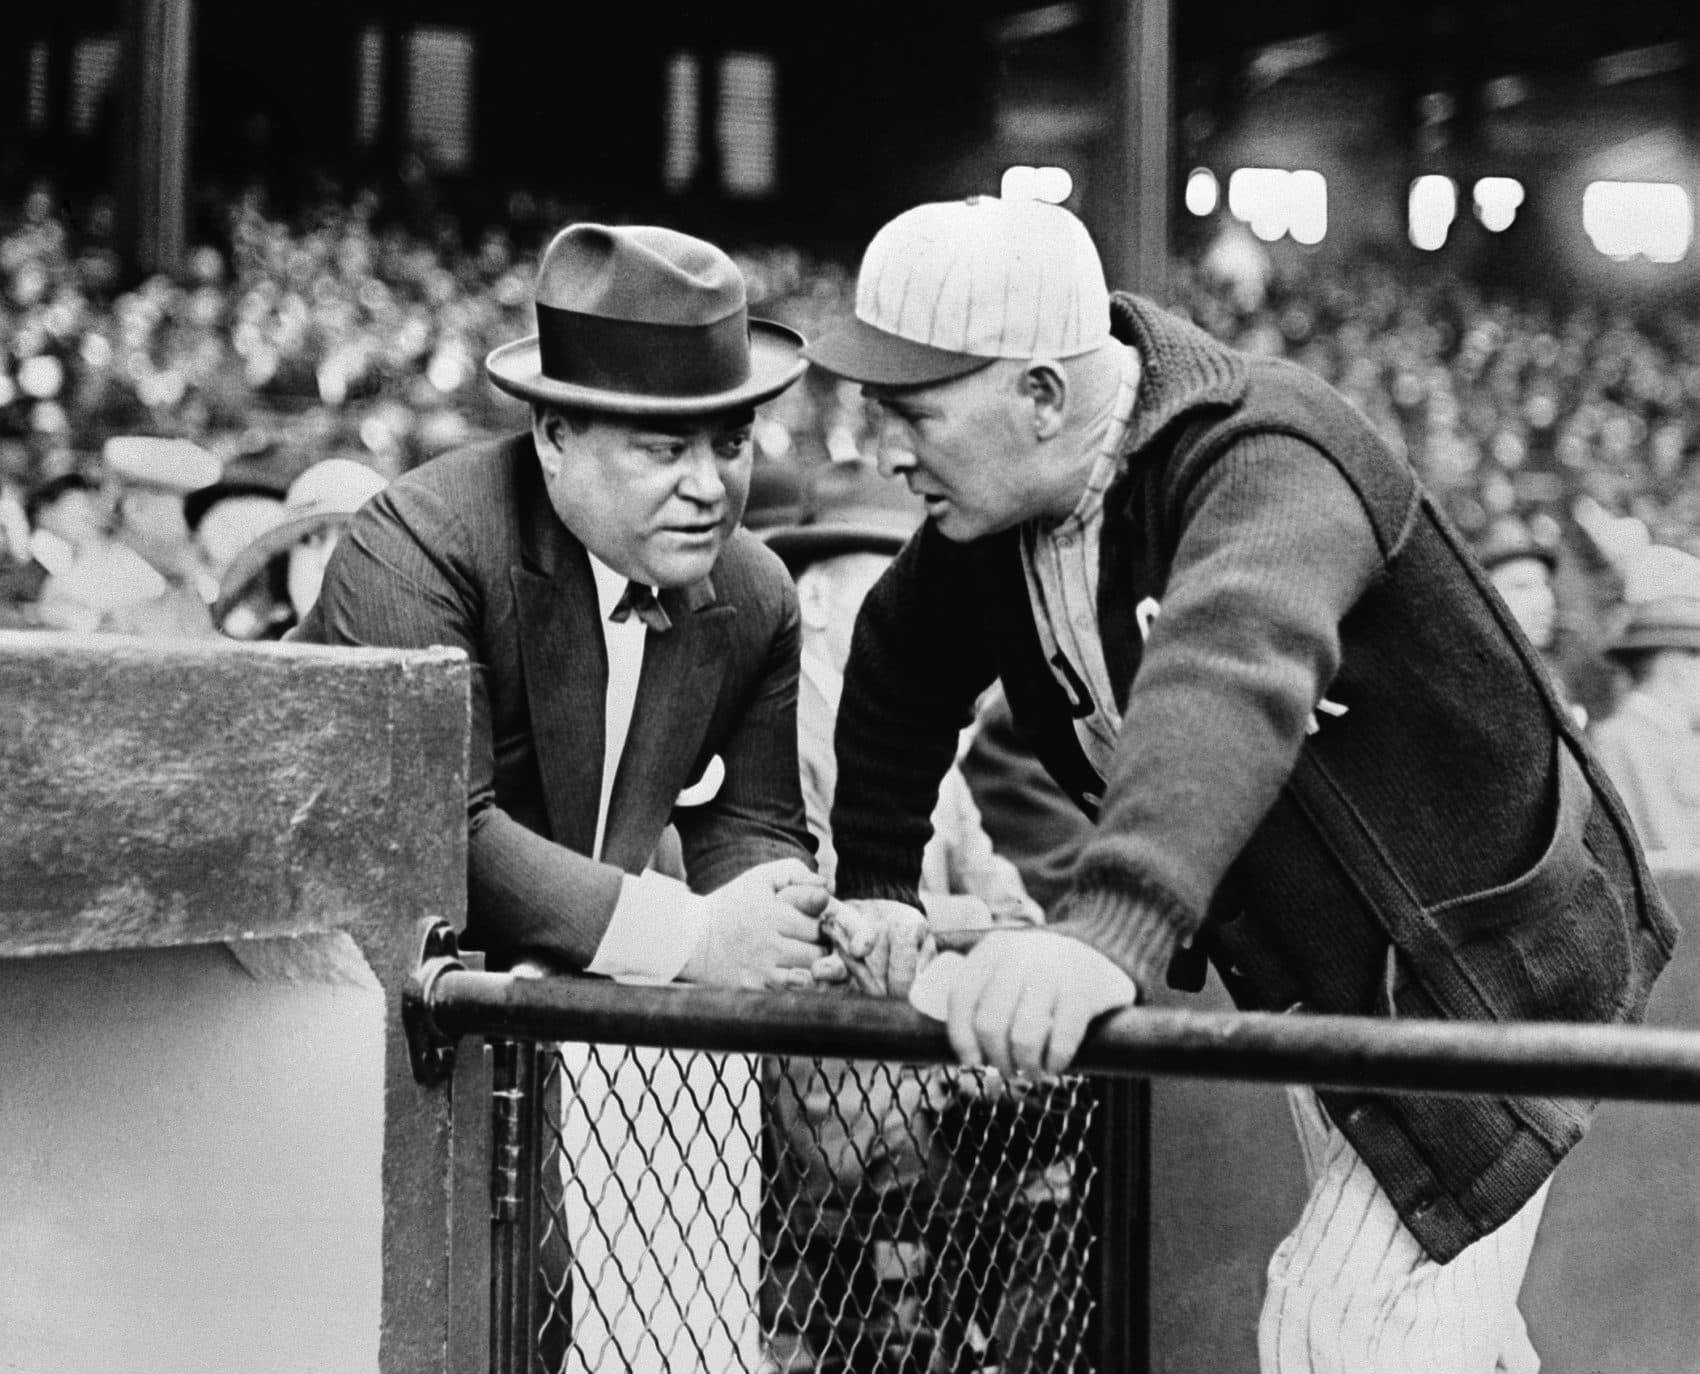 Harry Frazee, left, and Frank Chance, owner and manager of the Boston Red Sox respectively, huddle at New York's Yankee Stadium in 1923. Frazee made the deal that sent Babe Ruth from the Red Sox to the Yankees after the 1919 season. (AP Photo)